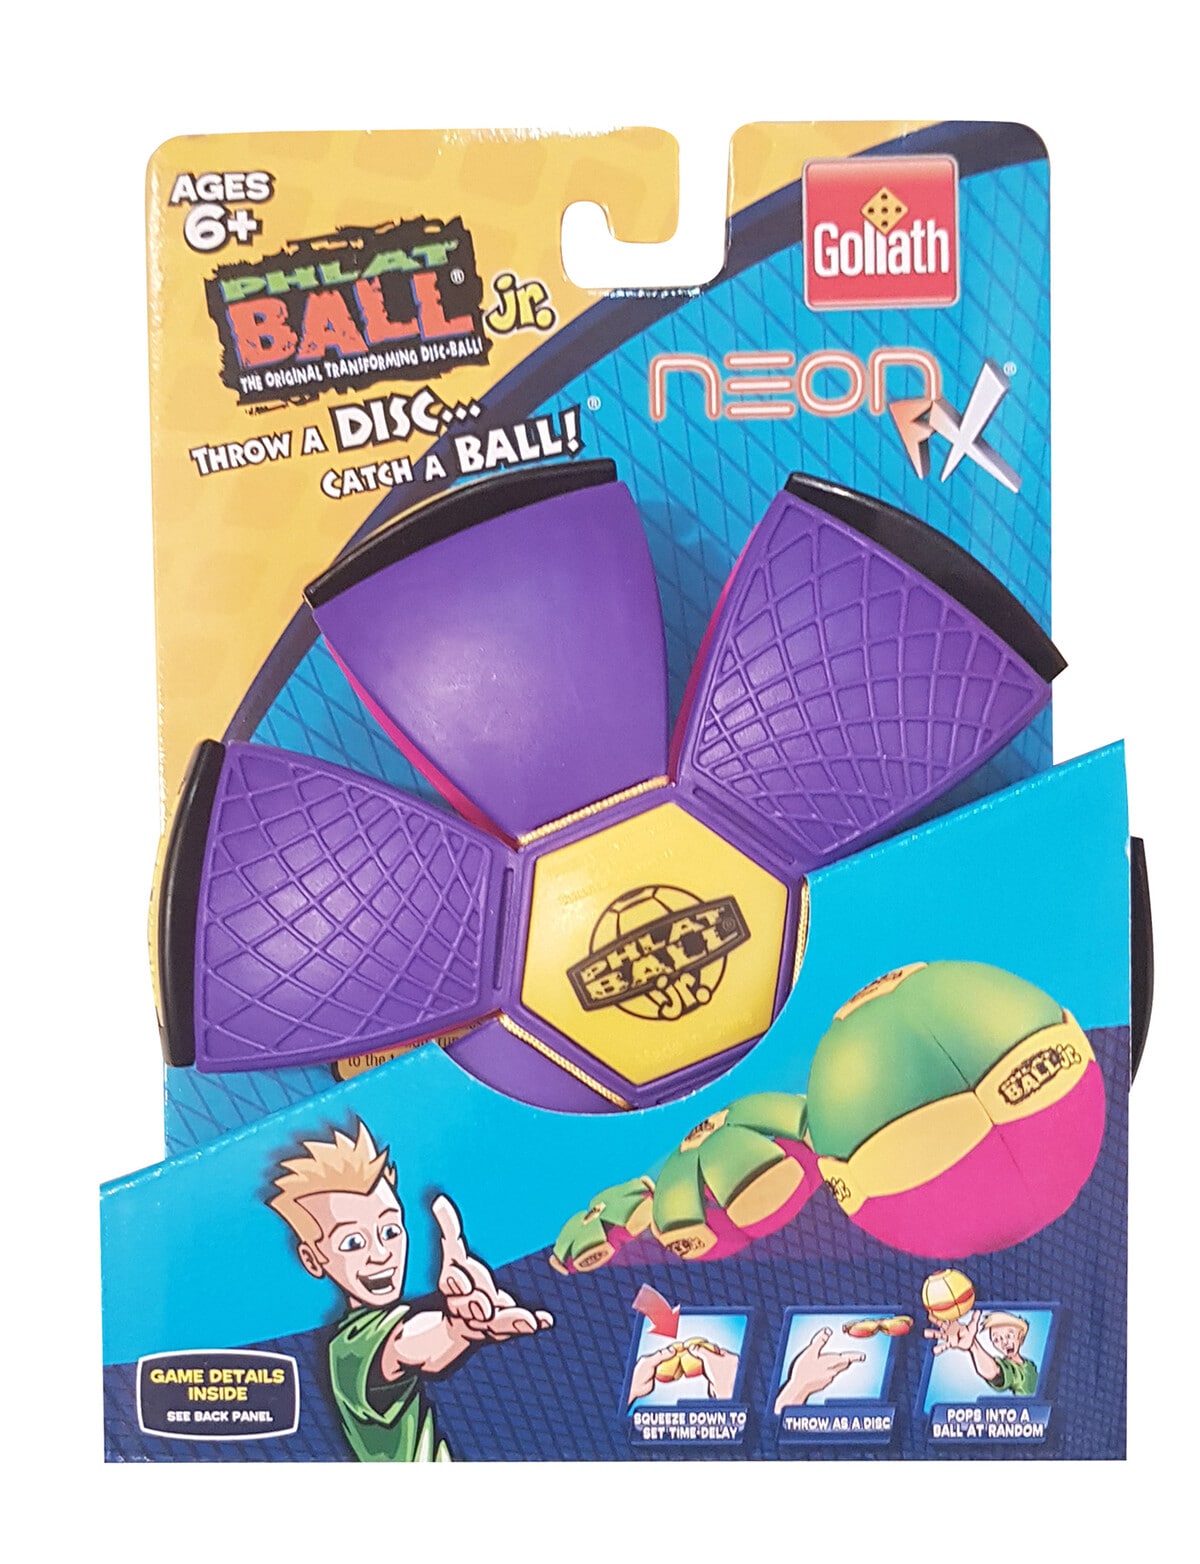 Phlat Ball Jr Assorted - Trampolines, Scooters & Outdoor Toys